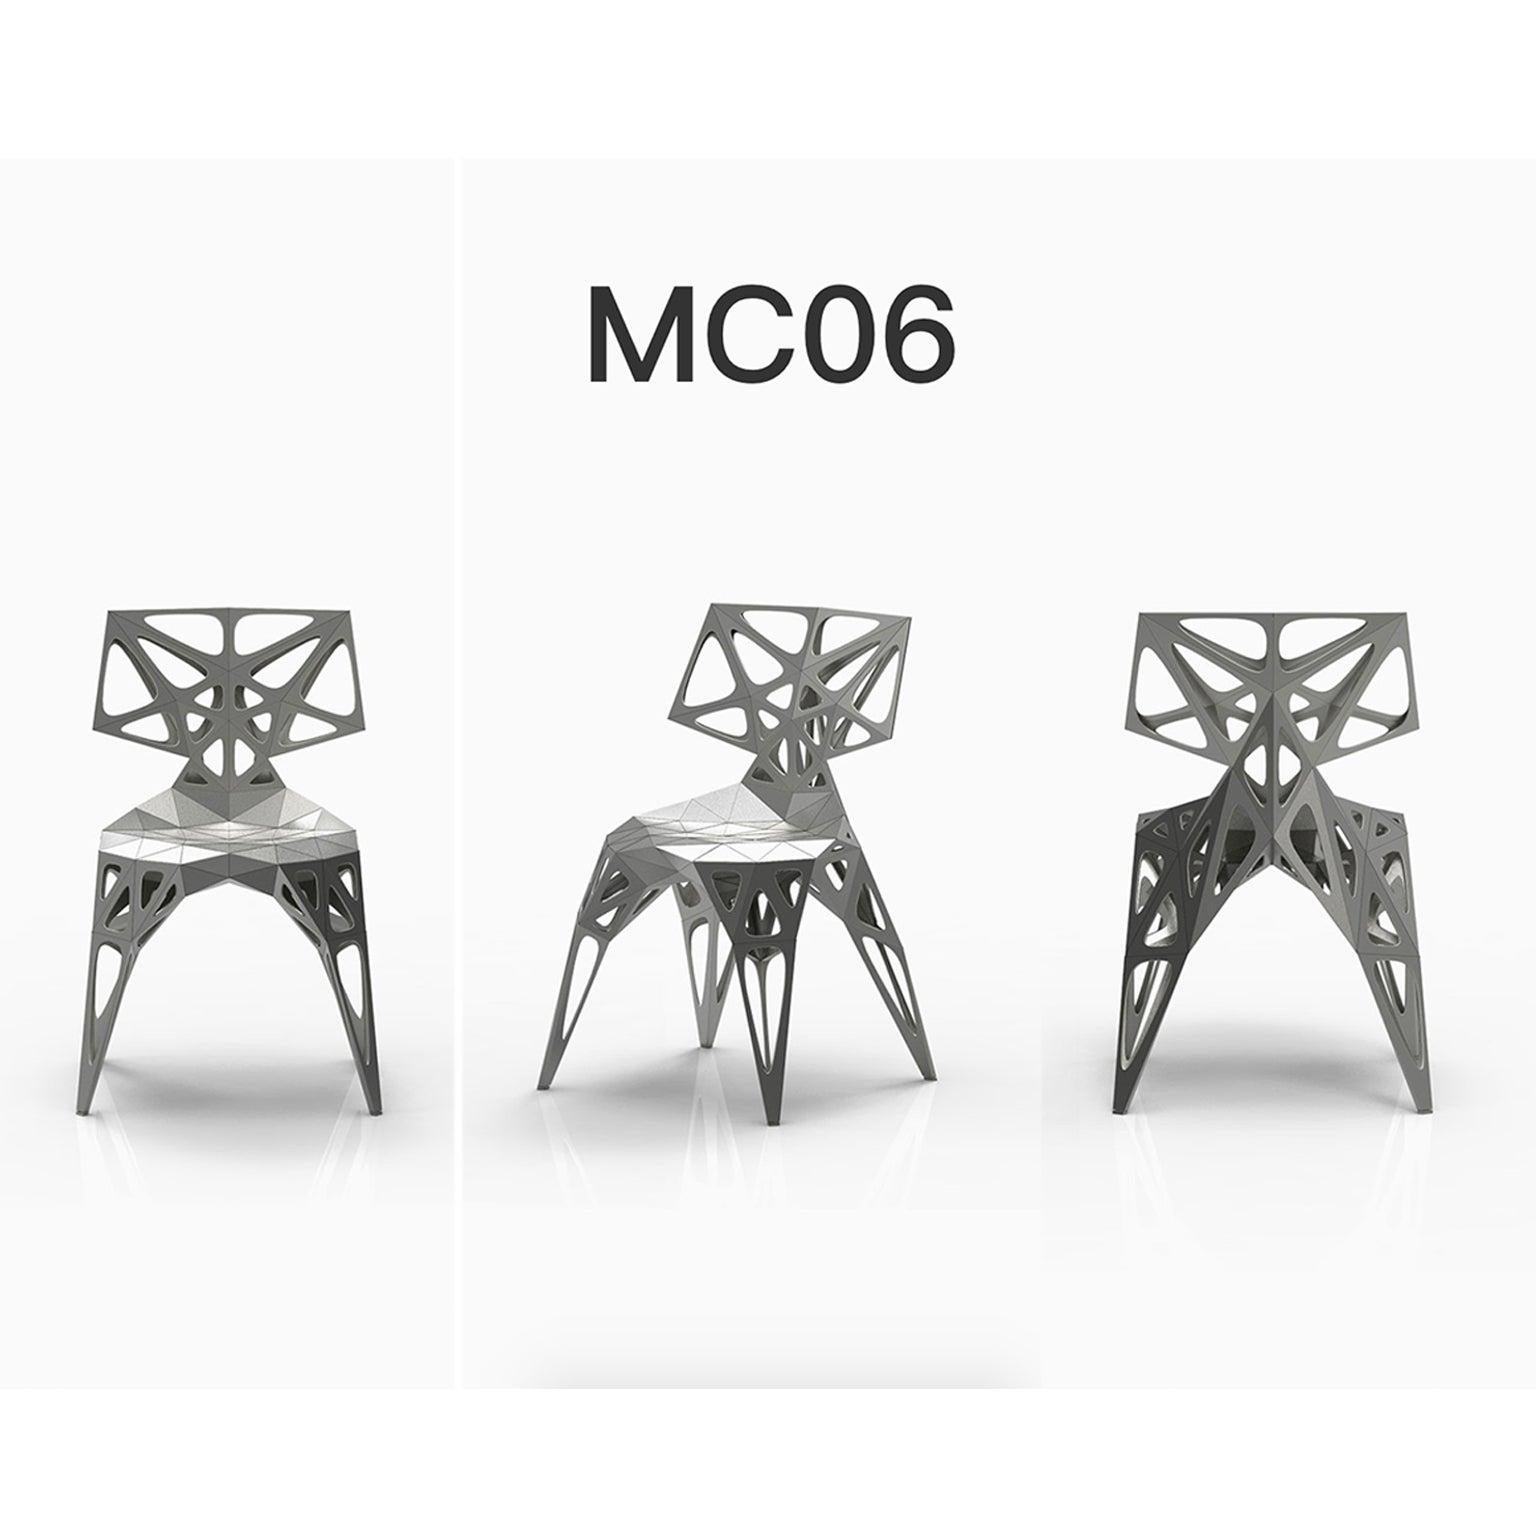 Outdoor and indoor
3 official types chairs / available
Solid
Dots
Frame
2 colors official / available / finish in polish/matt
Black
Silver

Furniture designer Zhoujie Zhang is known for the integration of automated digital design and